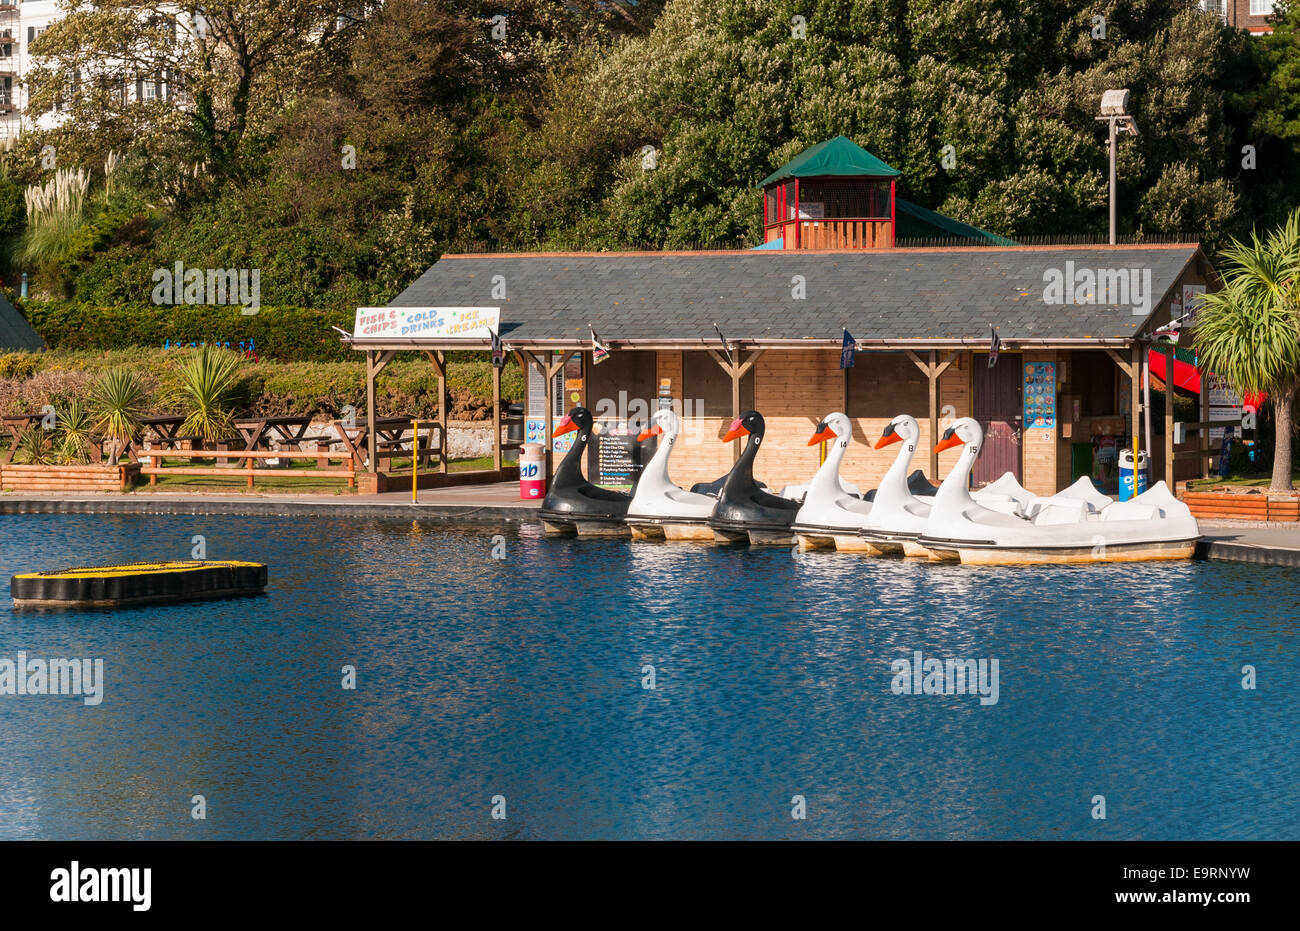 A boating lake on Exmouth sea front. The boats are shaped like swans and all numbered. Stock Photo